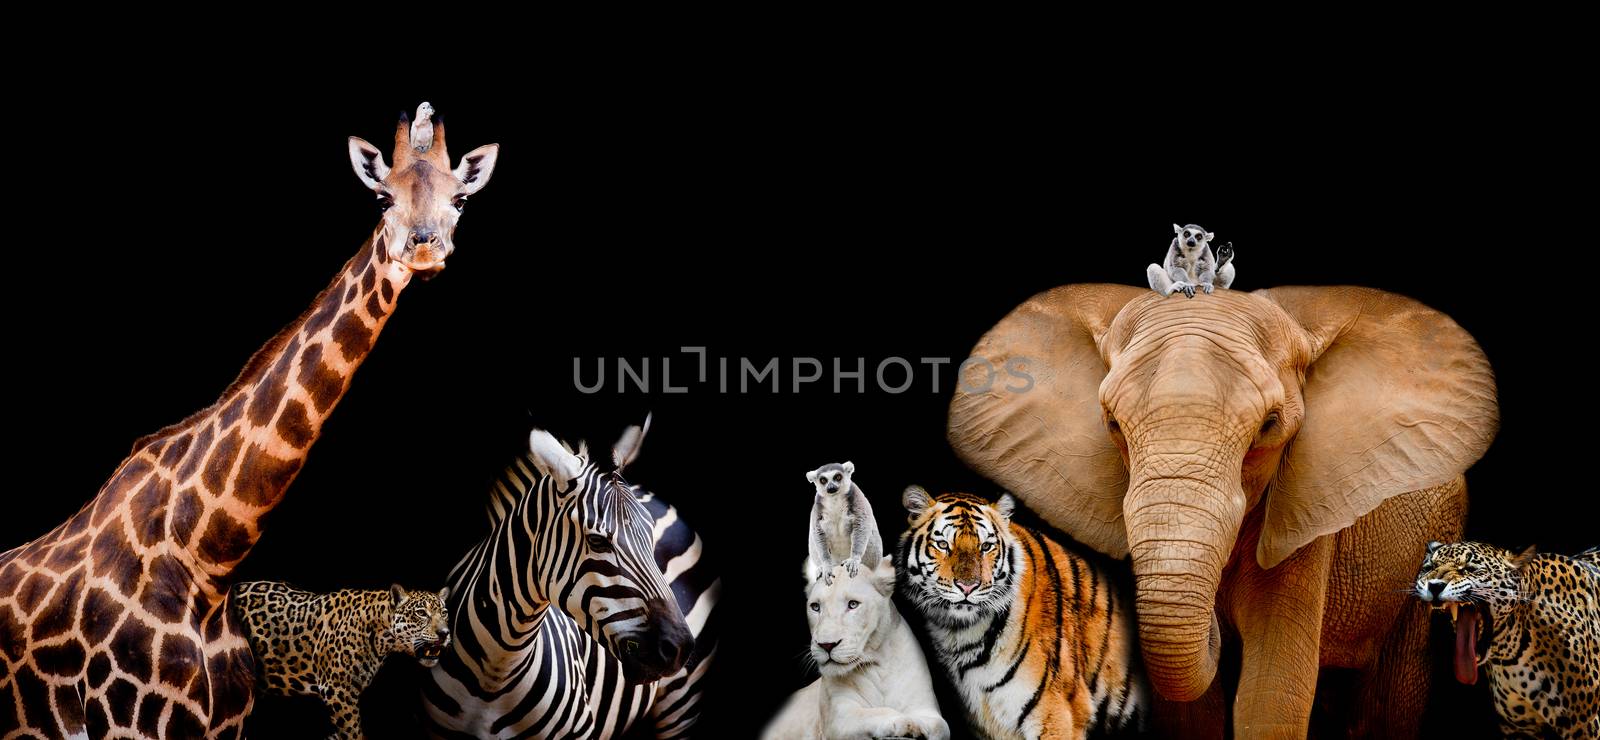 A group of animals are together on a black background with text  by art9858